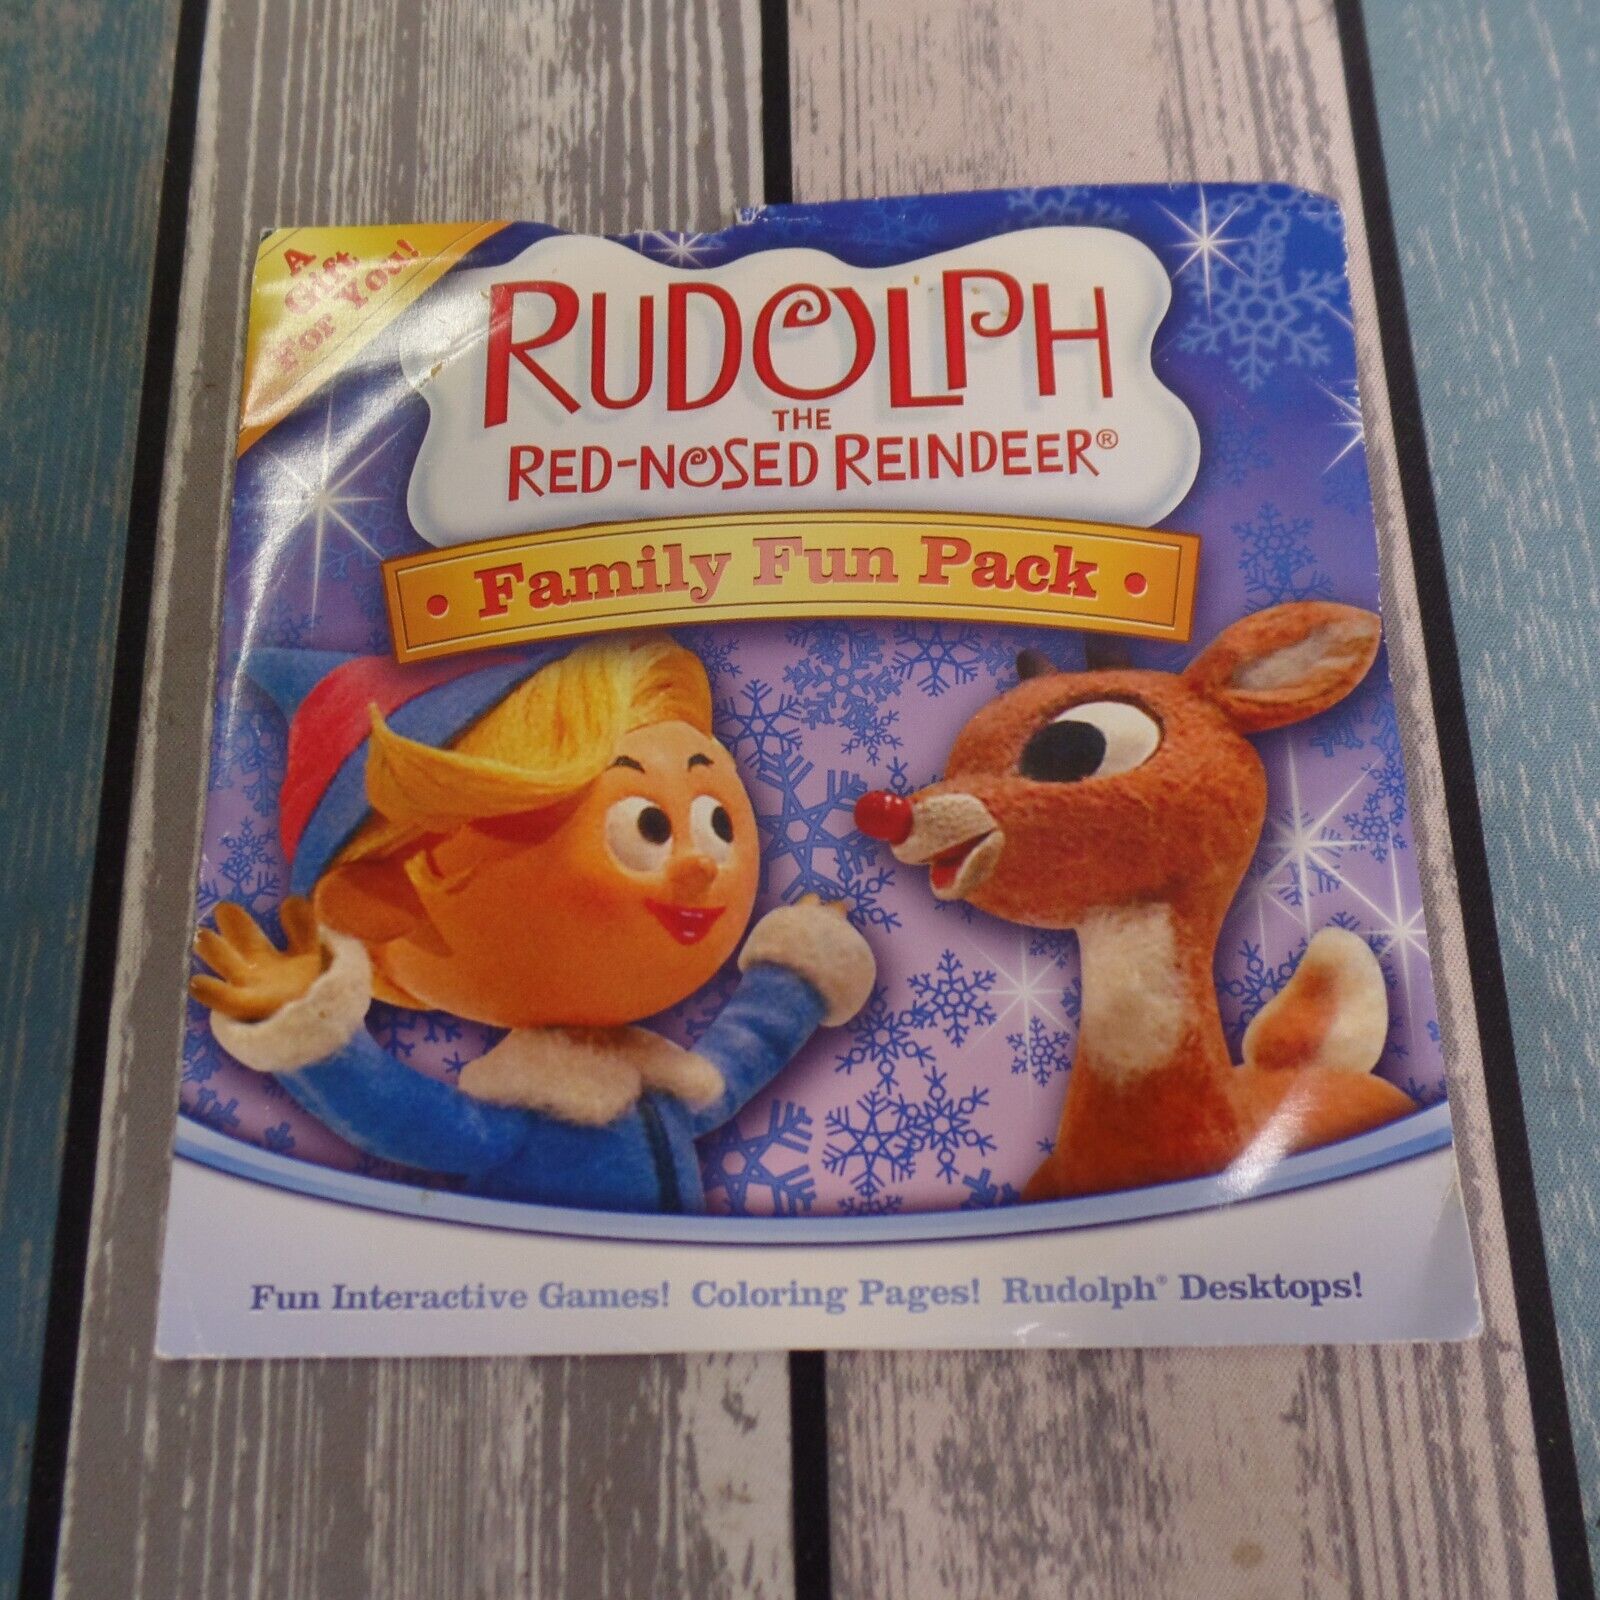 Rudolph The Red-Nosed Reindeer Family Fun Pack PC CD coloring page desktop games